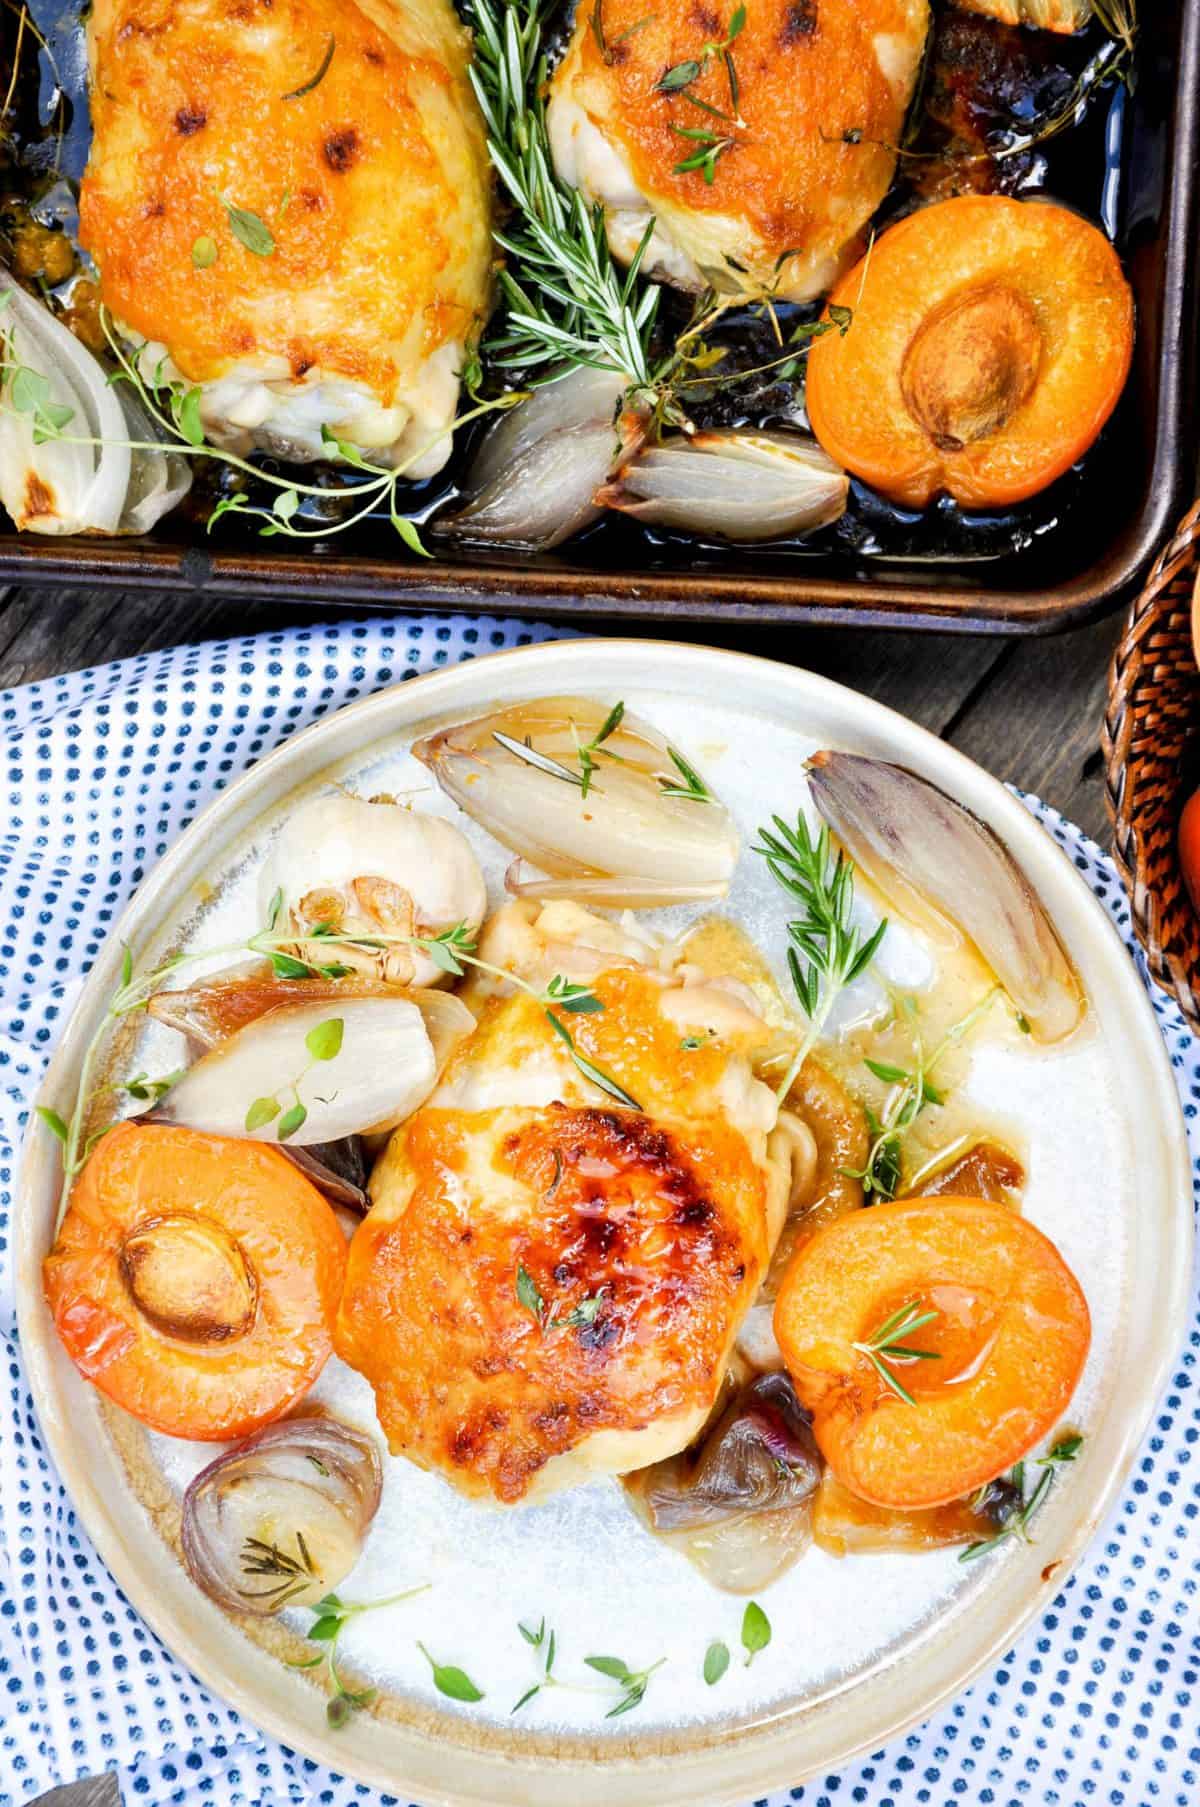 Fresh Apricot & Shallot Sheet Pan Chicken plated to serve.